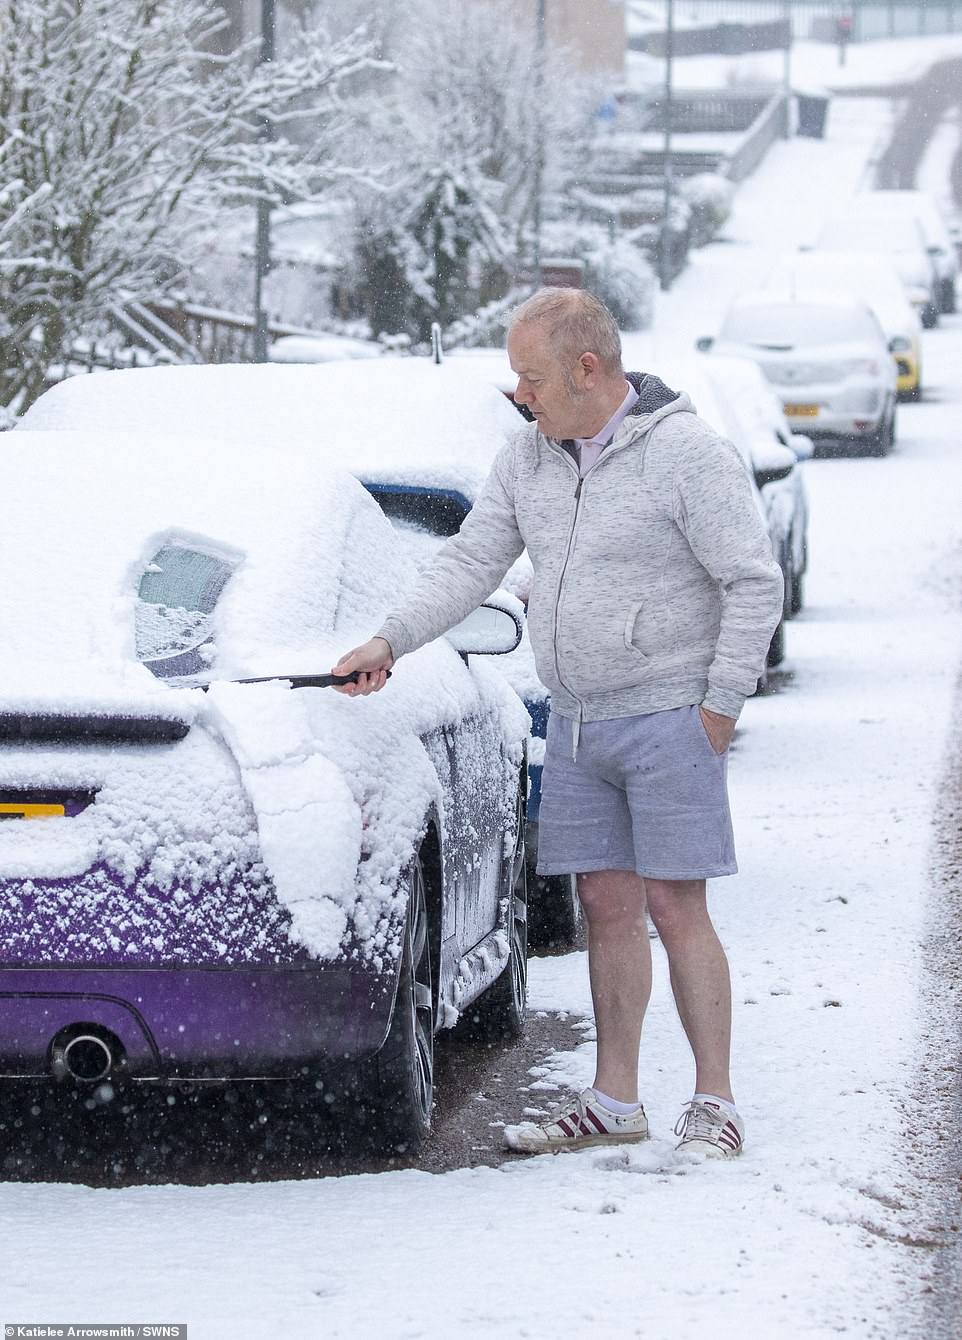 Swathes of the country woke up to temperatures at around minus two degrees today, but it didn't stop some from donning their shorts in the brisk South Lanarkshire cold